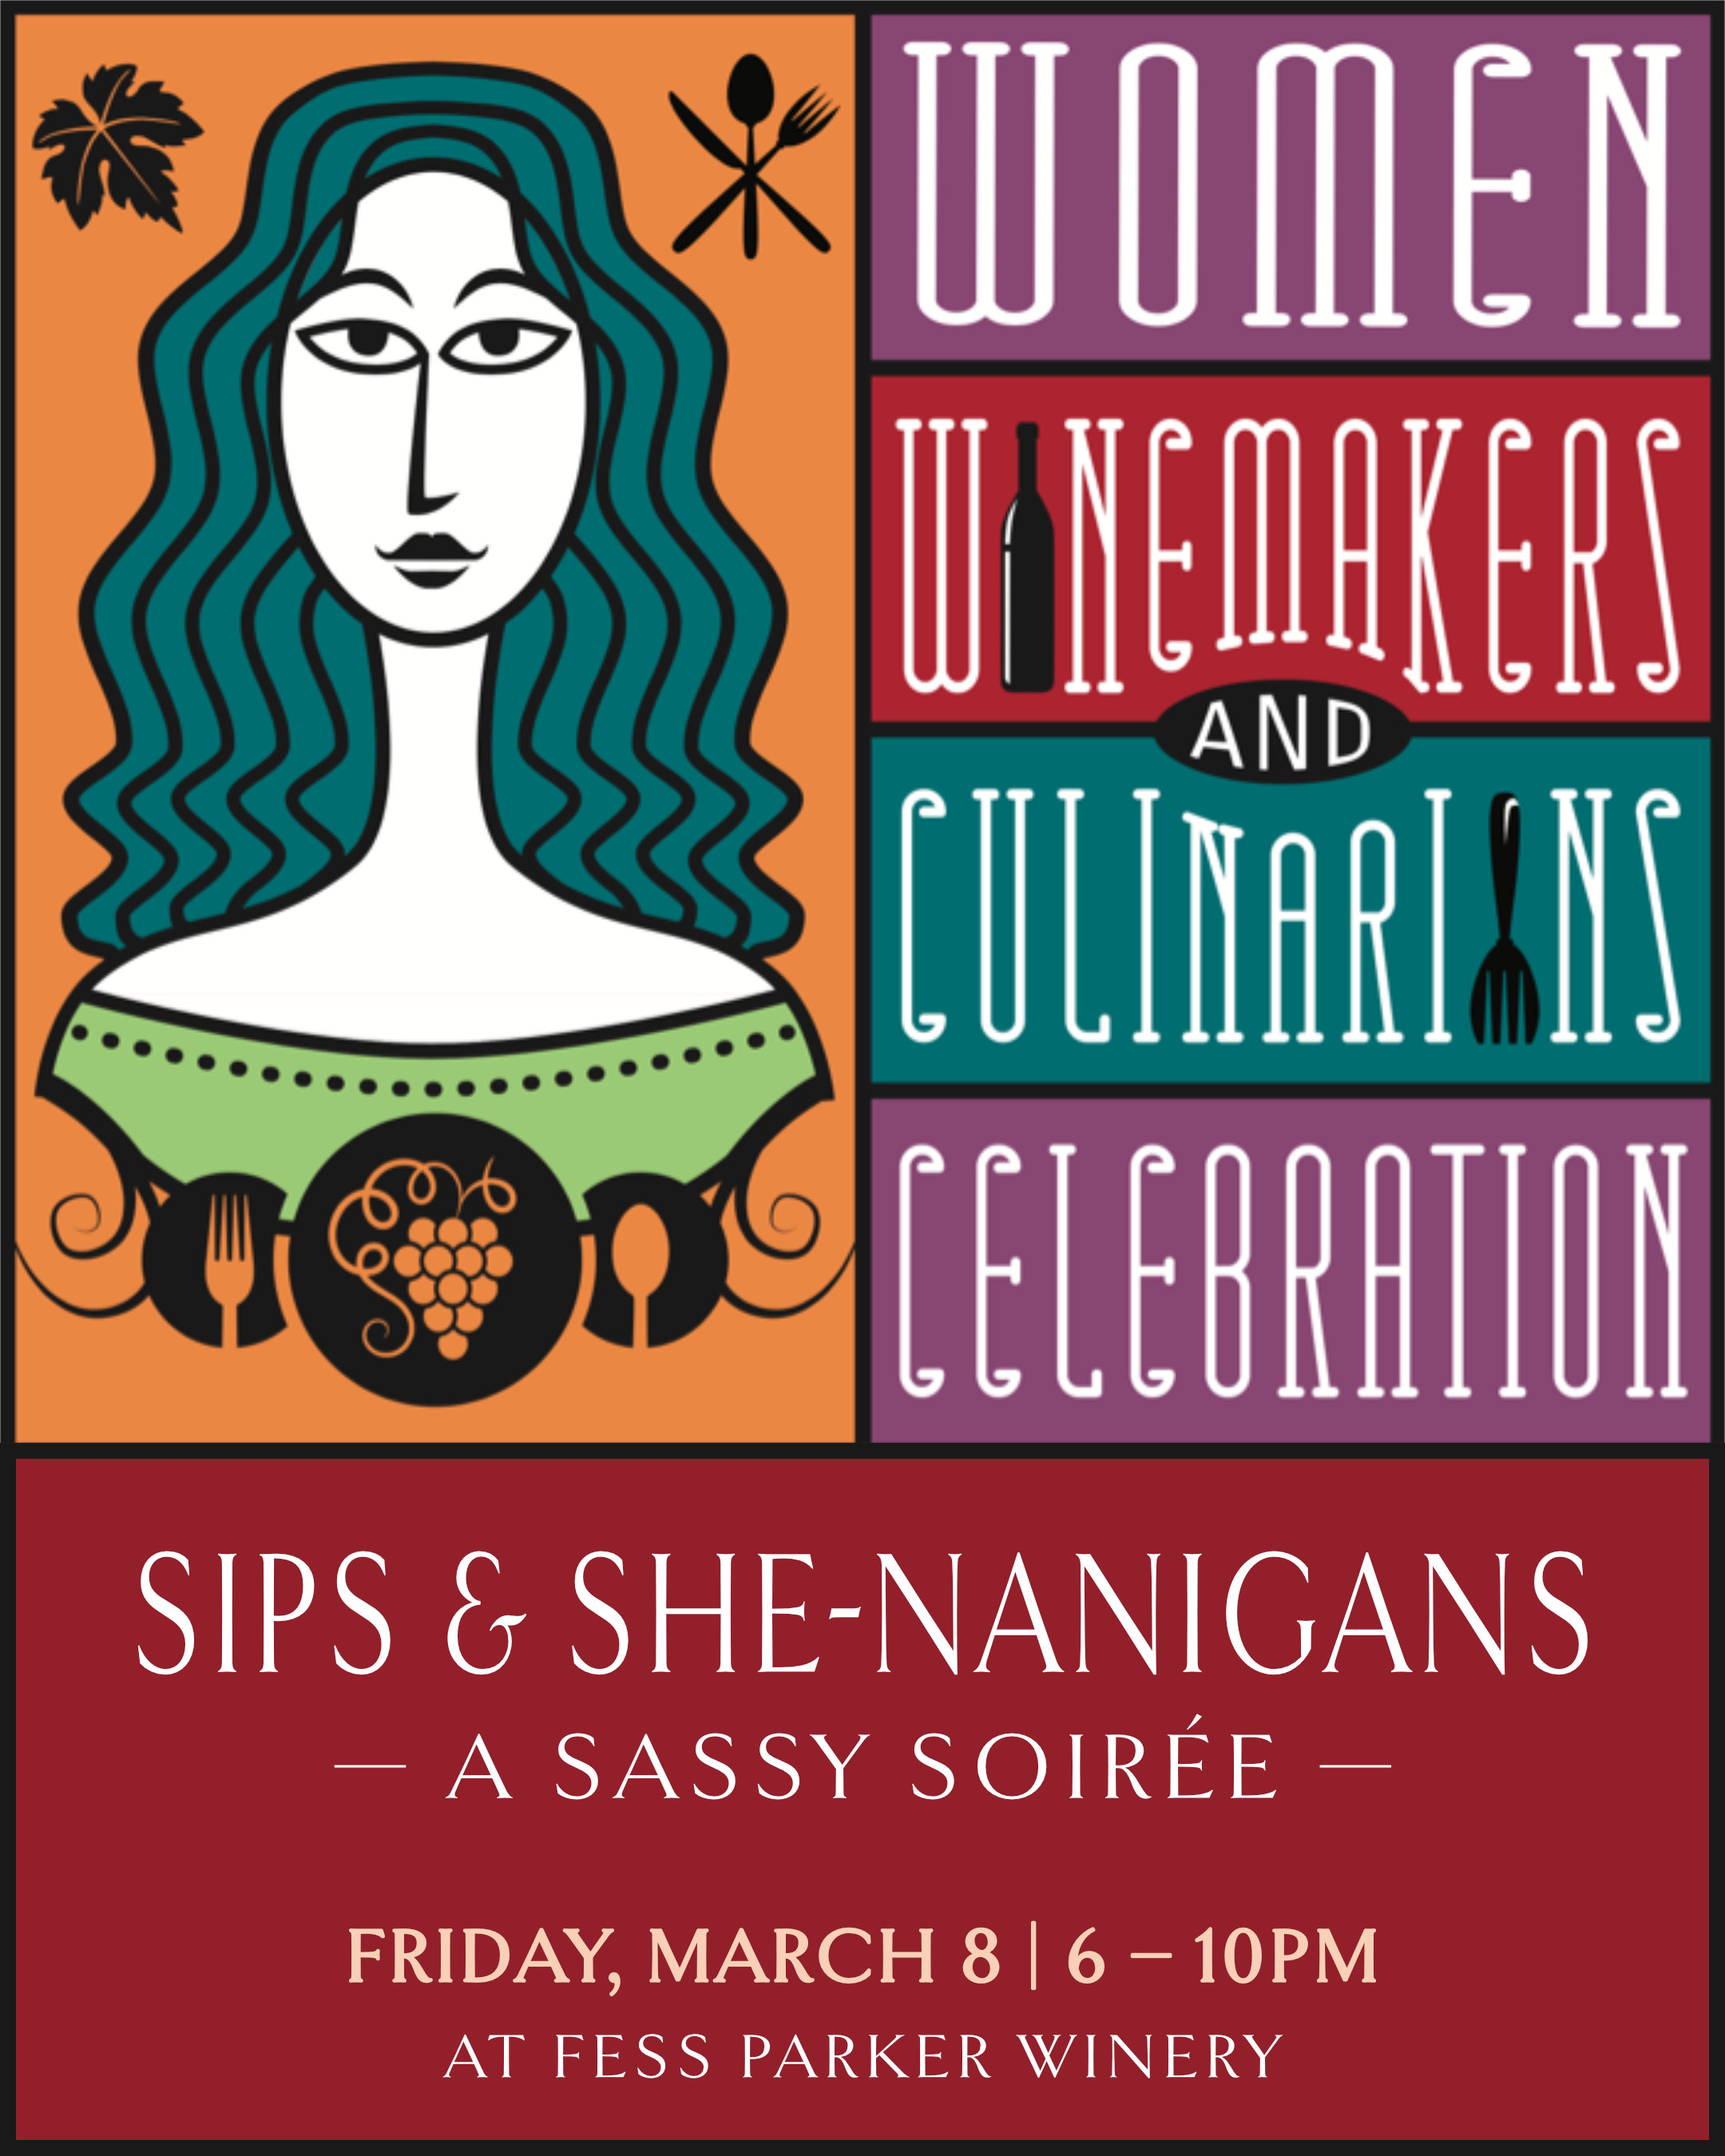 Women Winemakers and Culinarians Celebration - Sips & She-nanigans, A Sassy Soirée